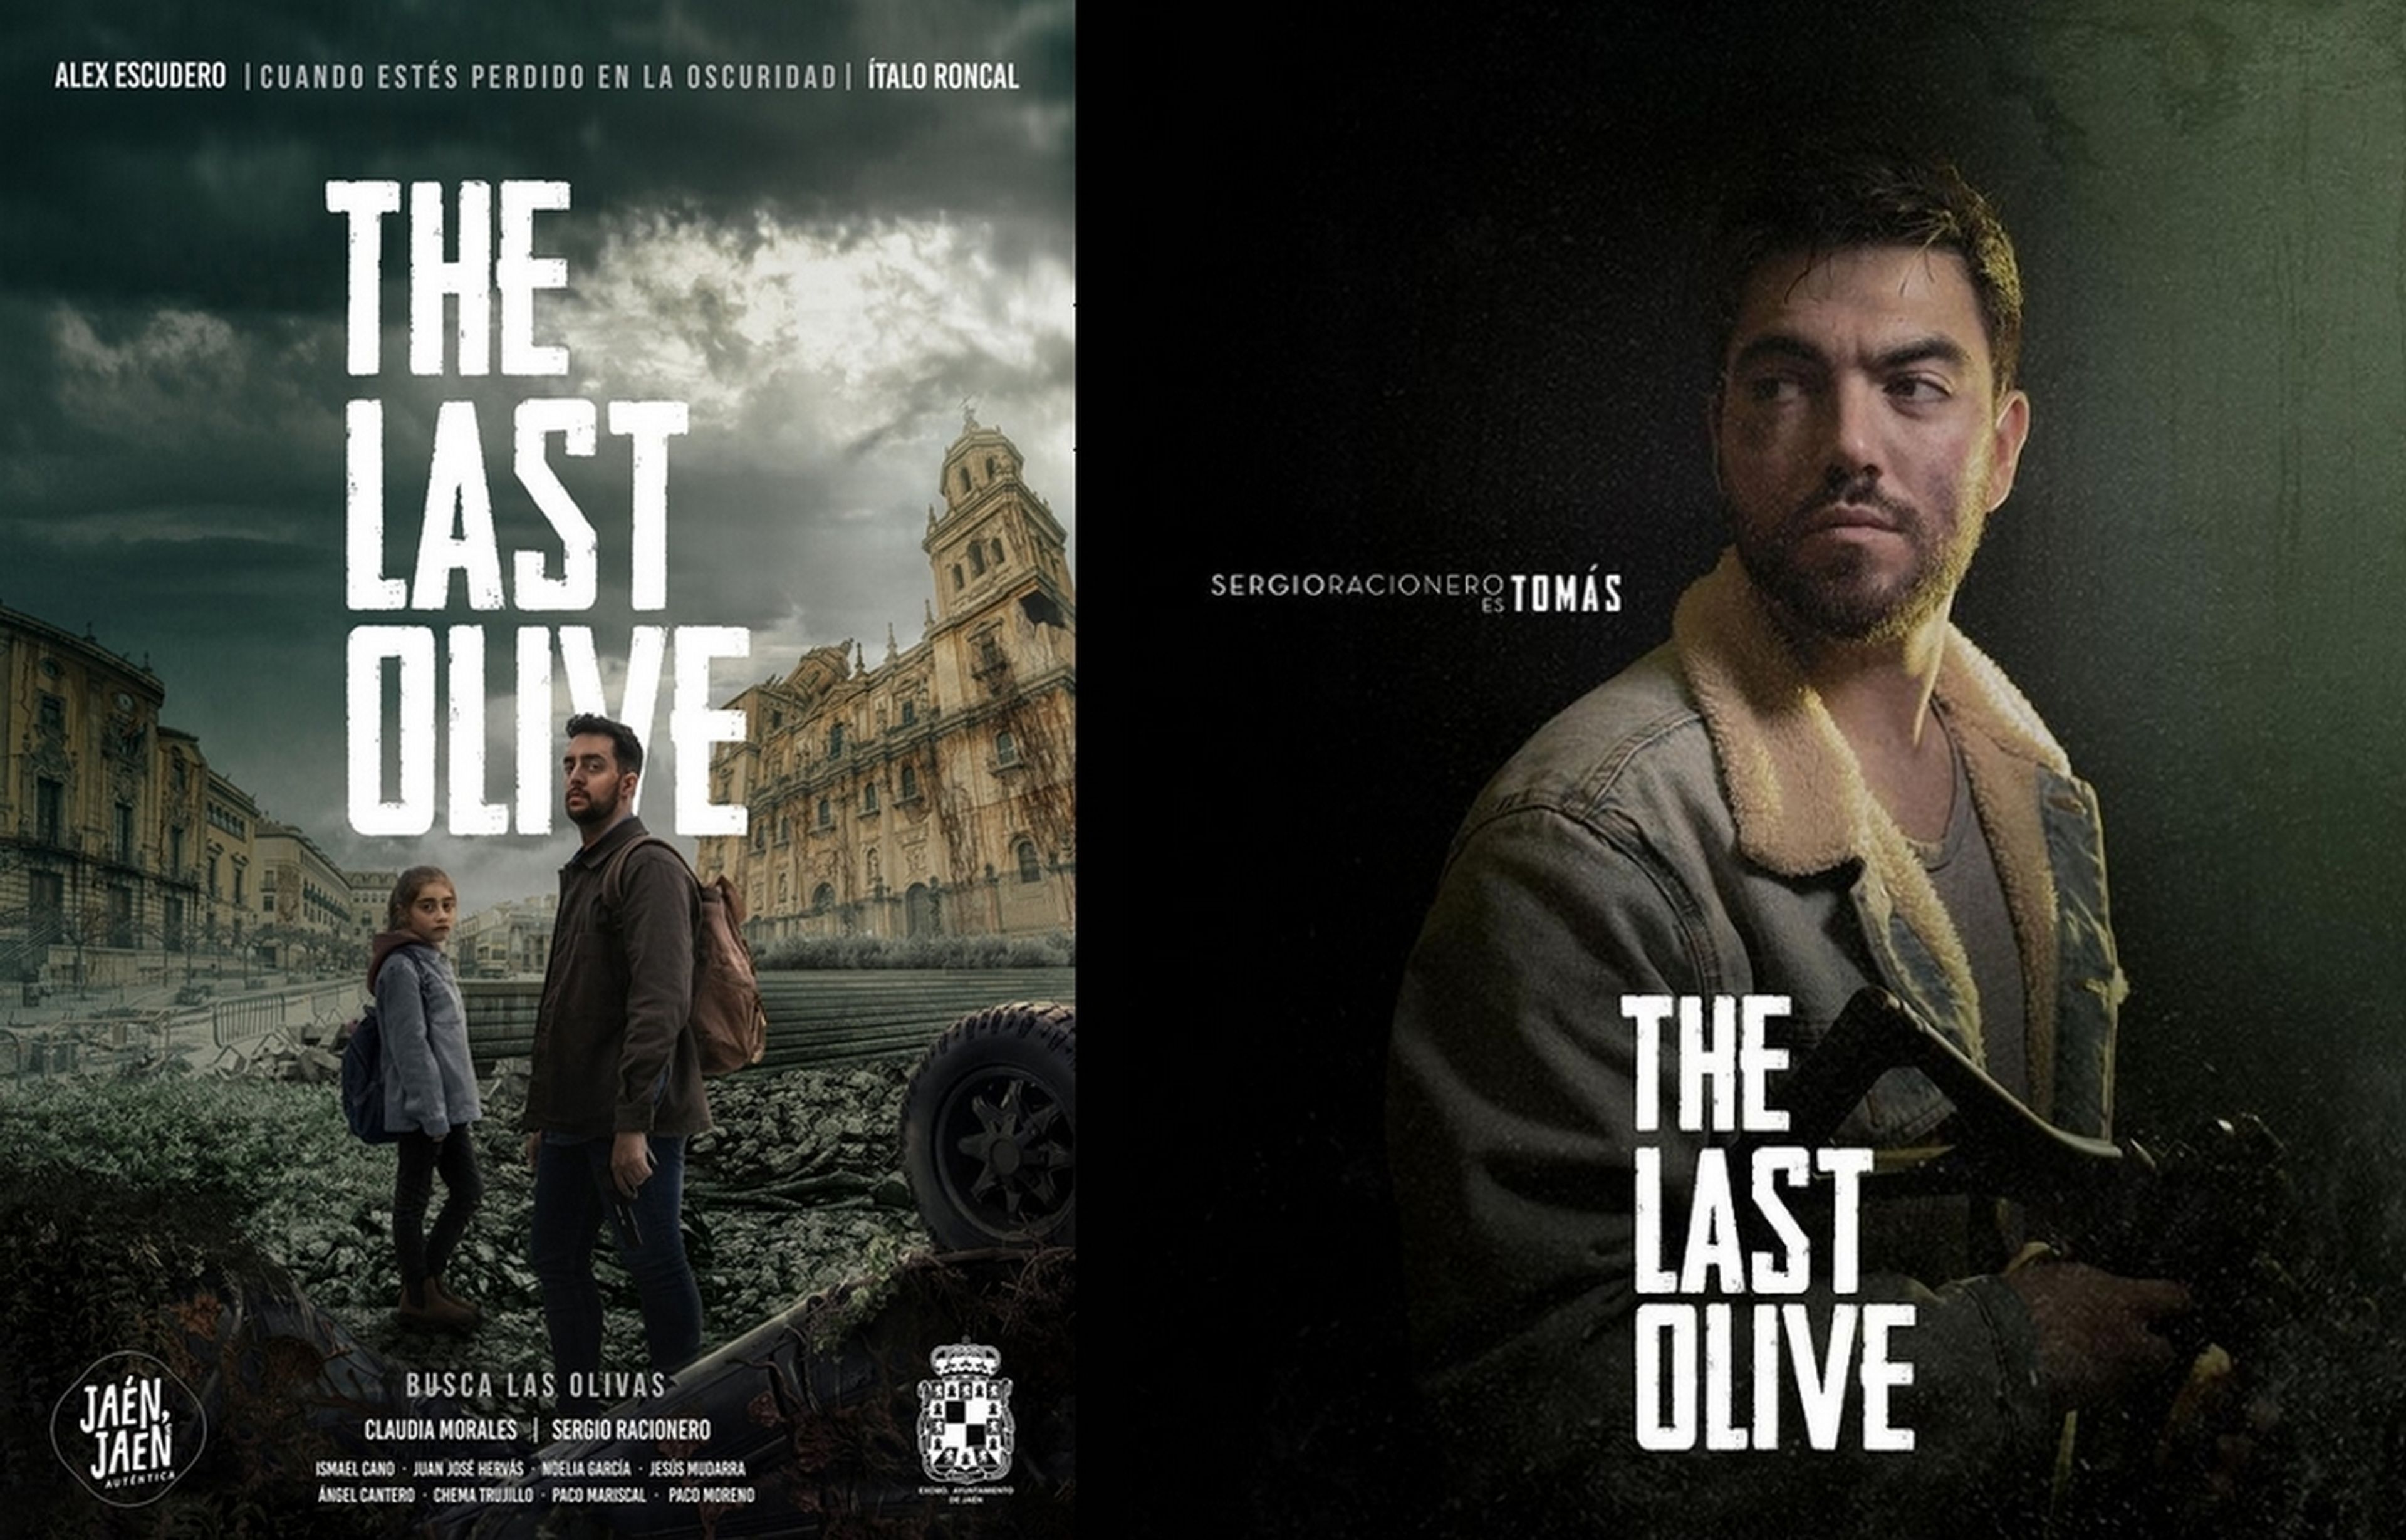 The Last Olive, the parody of The Last of Us shot in Jaén, sweeps with its first chapter